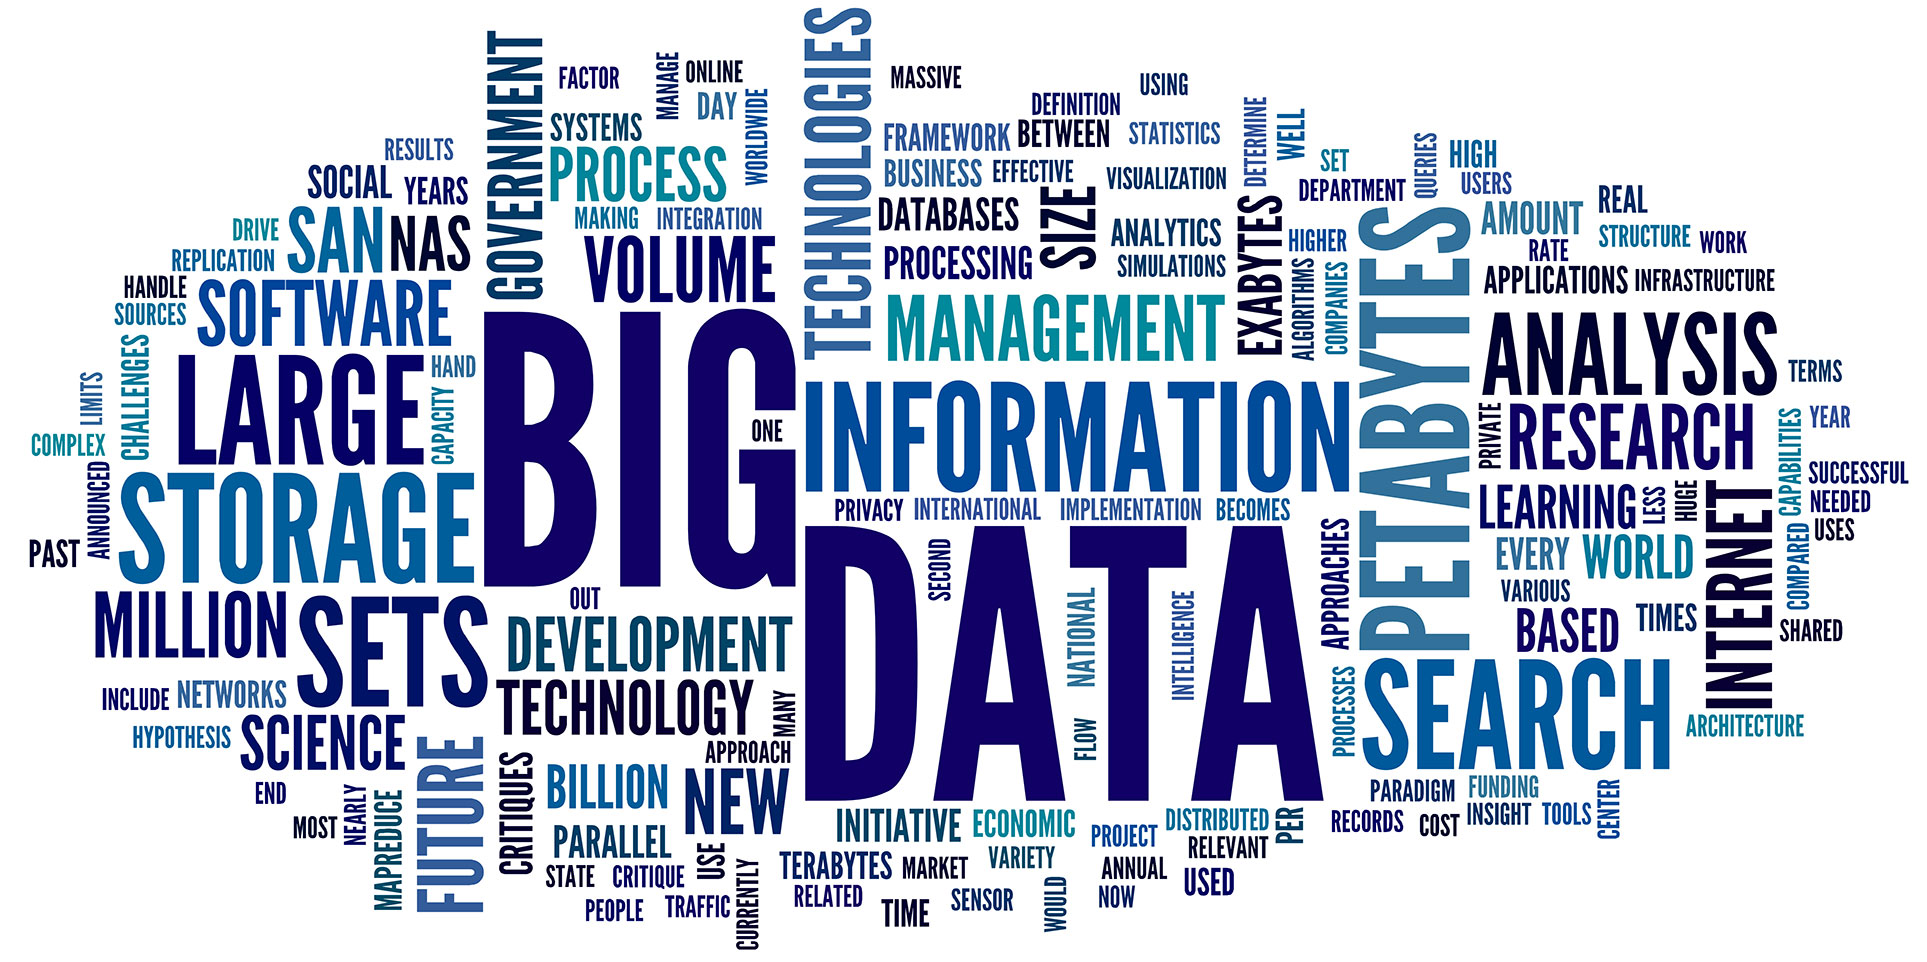 My learnings about Big Data